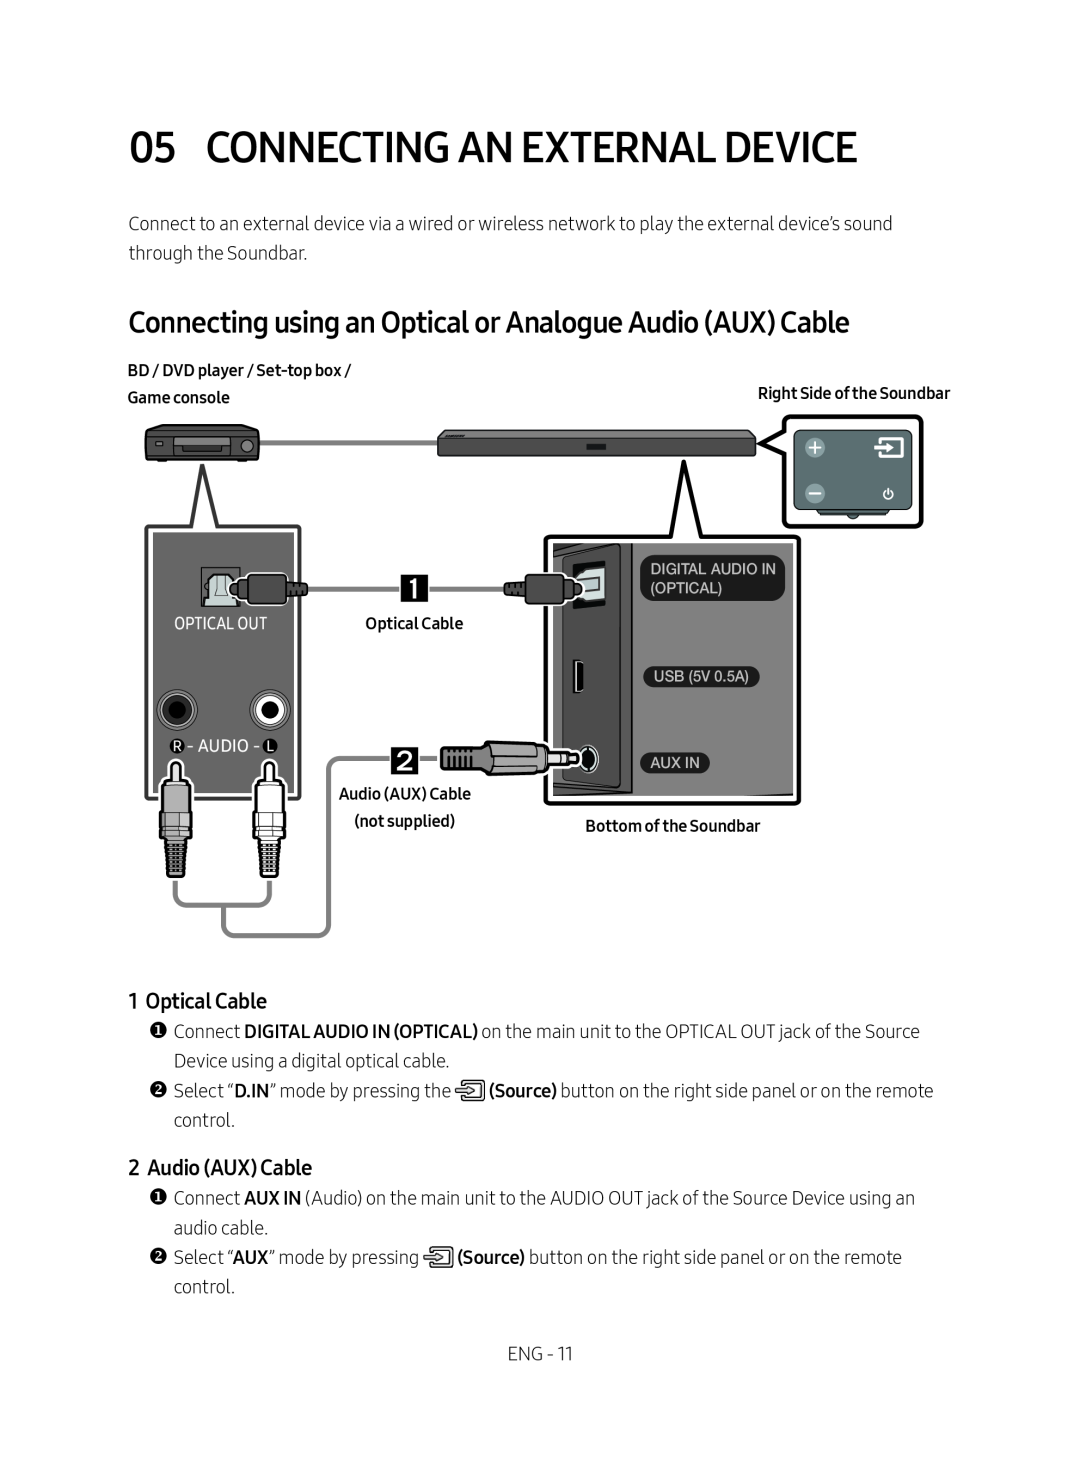 Samsung HW-M450/EN Connecting An External Device, Connecting using an Optical or Analogue Audio AUX Cable, Optical Cable 